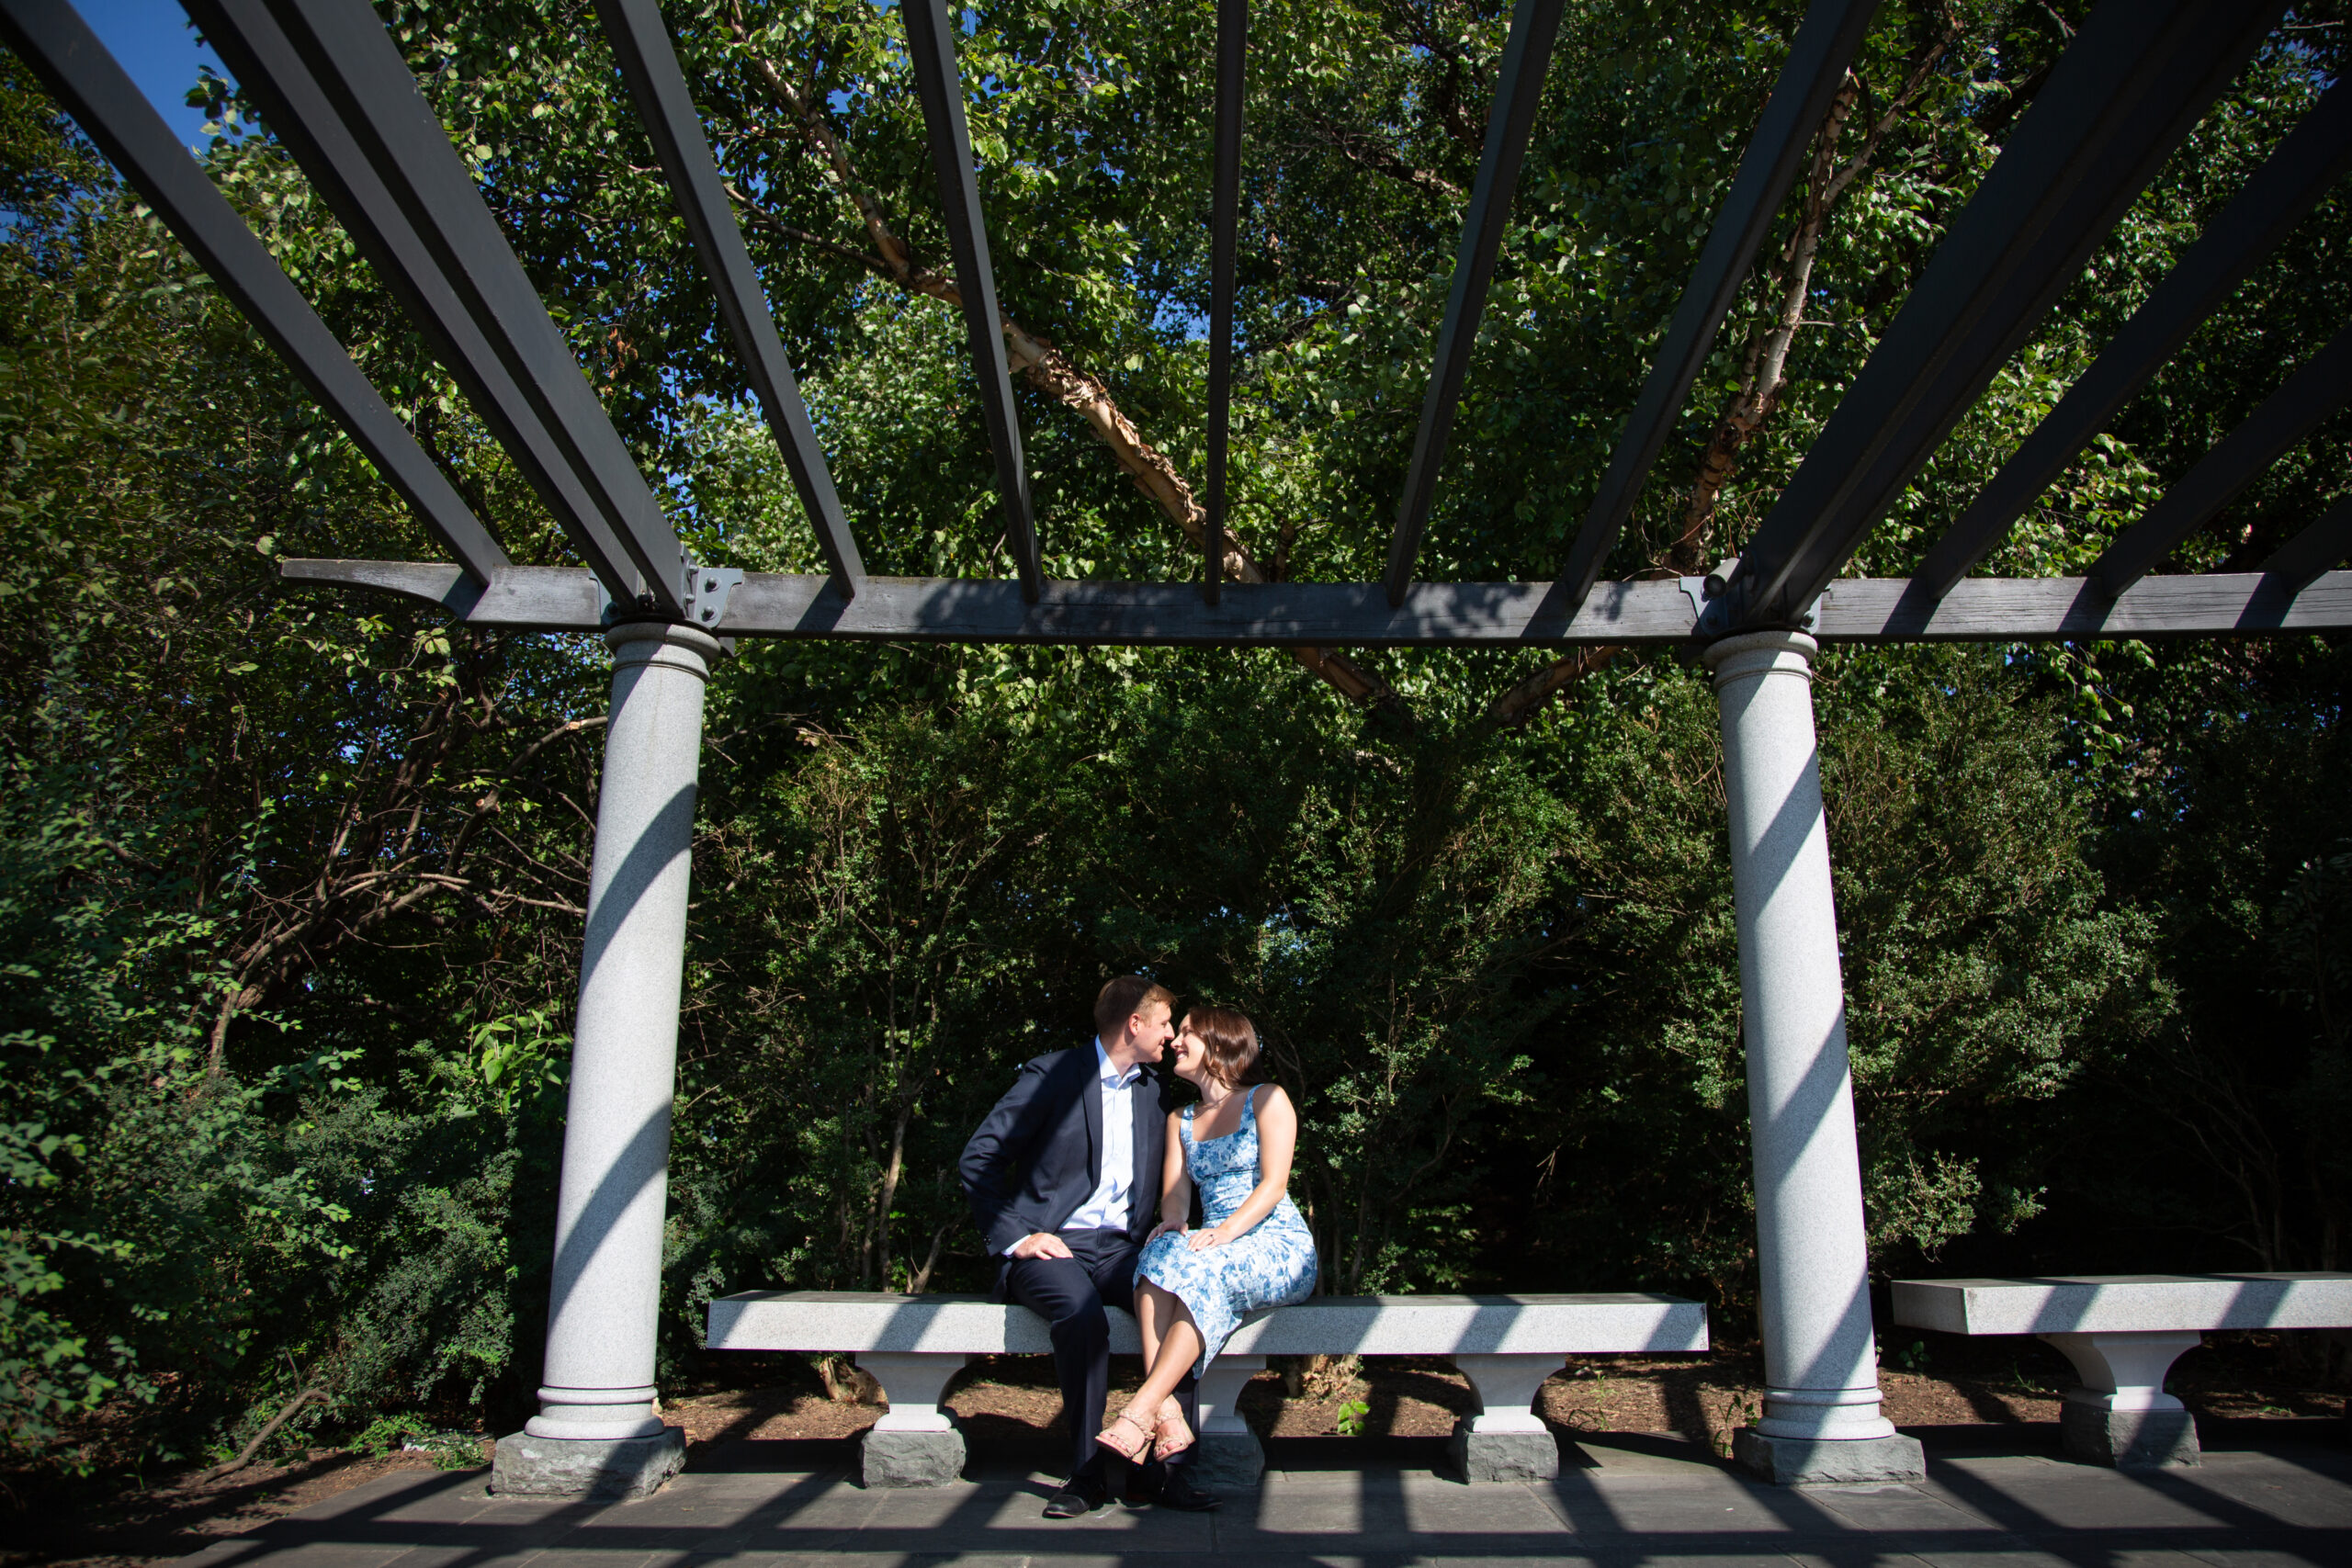 Couple sharing a romantic moment on a bench under trees